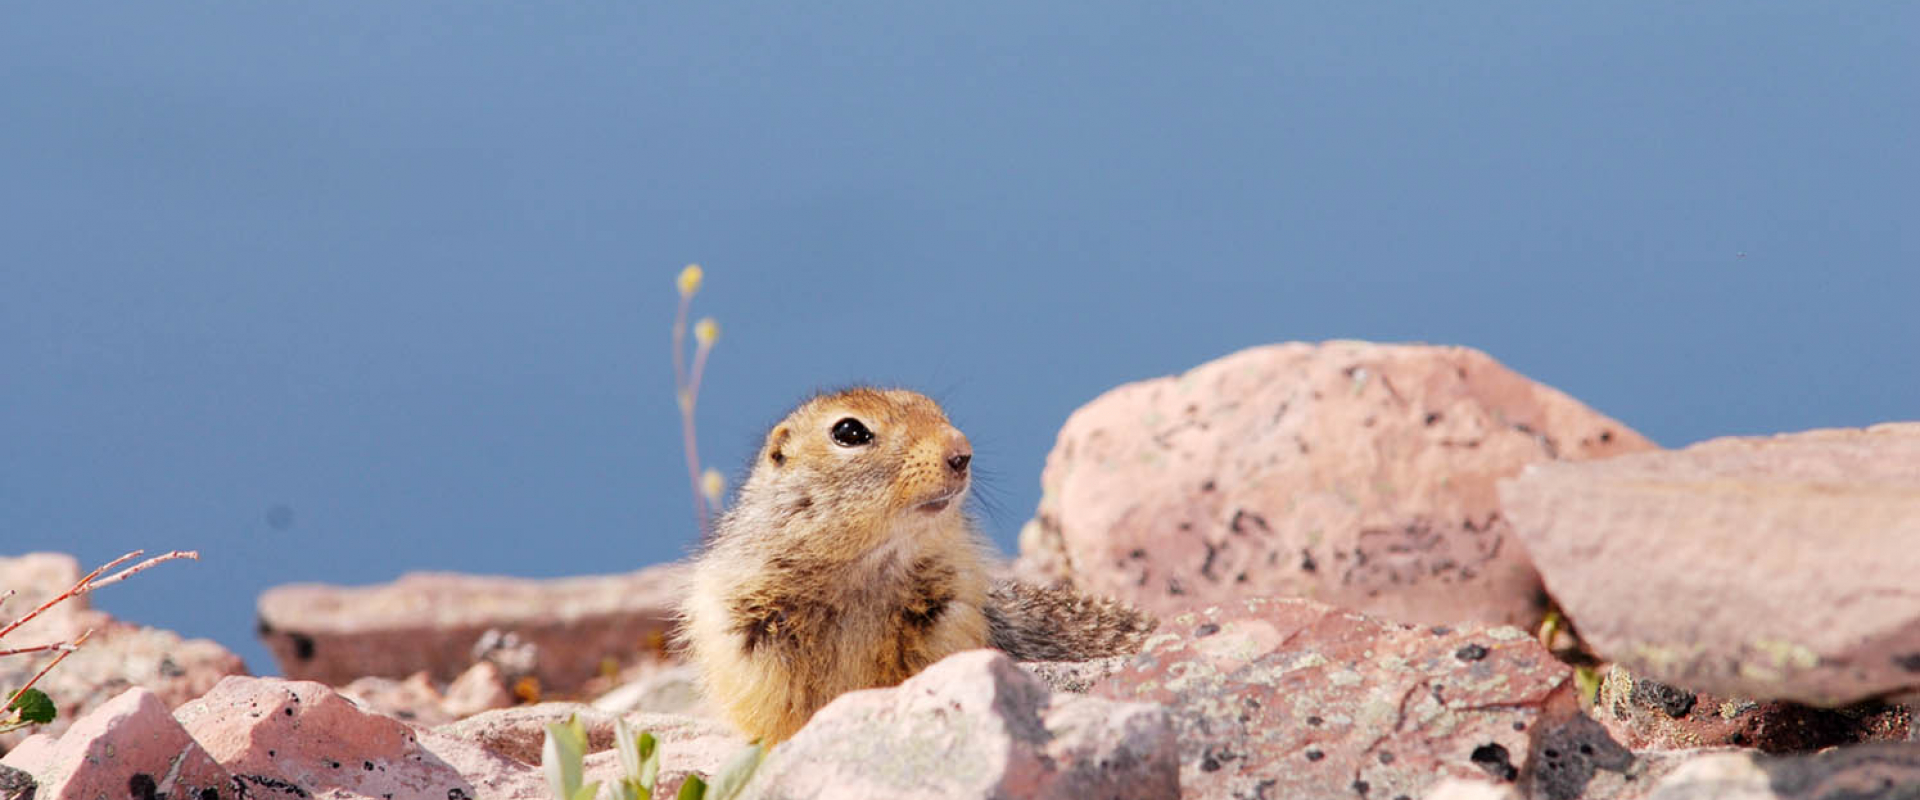 An arctic ground squirrel pokes its head up among rocks near the Thelon River